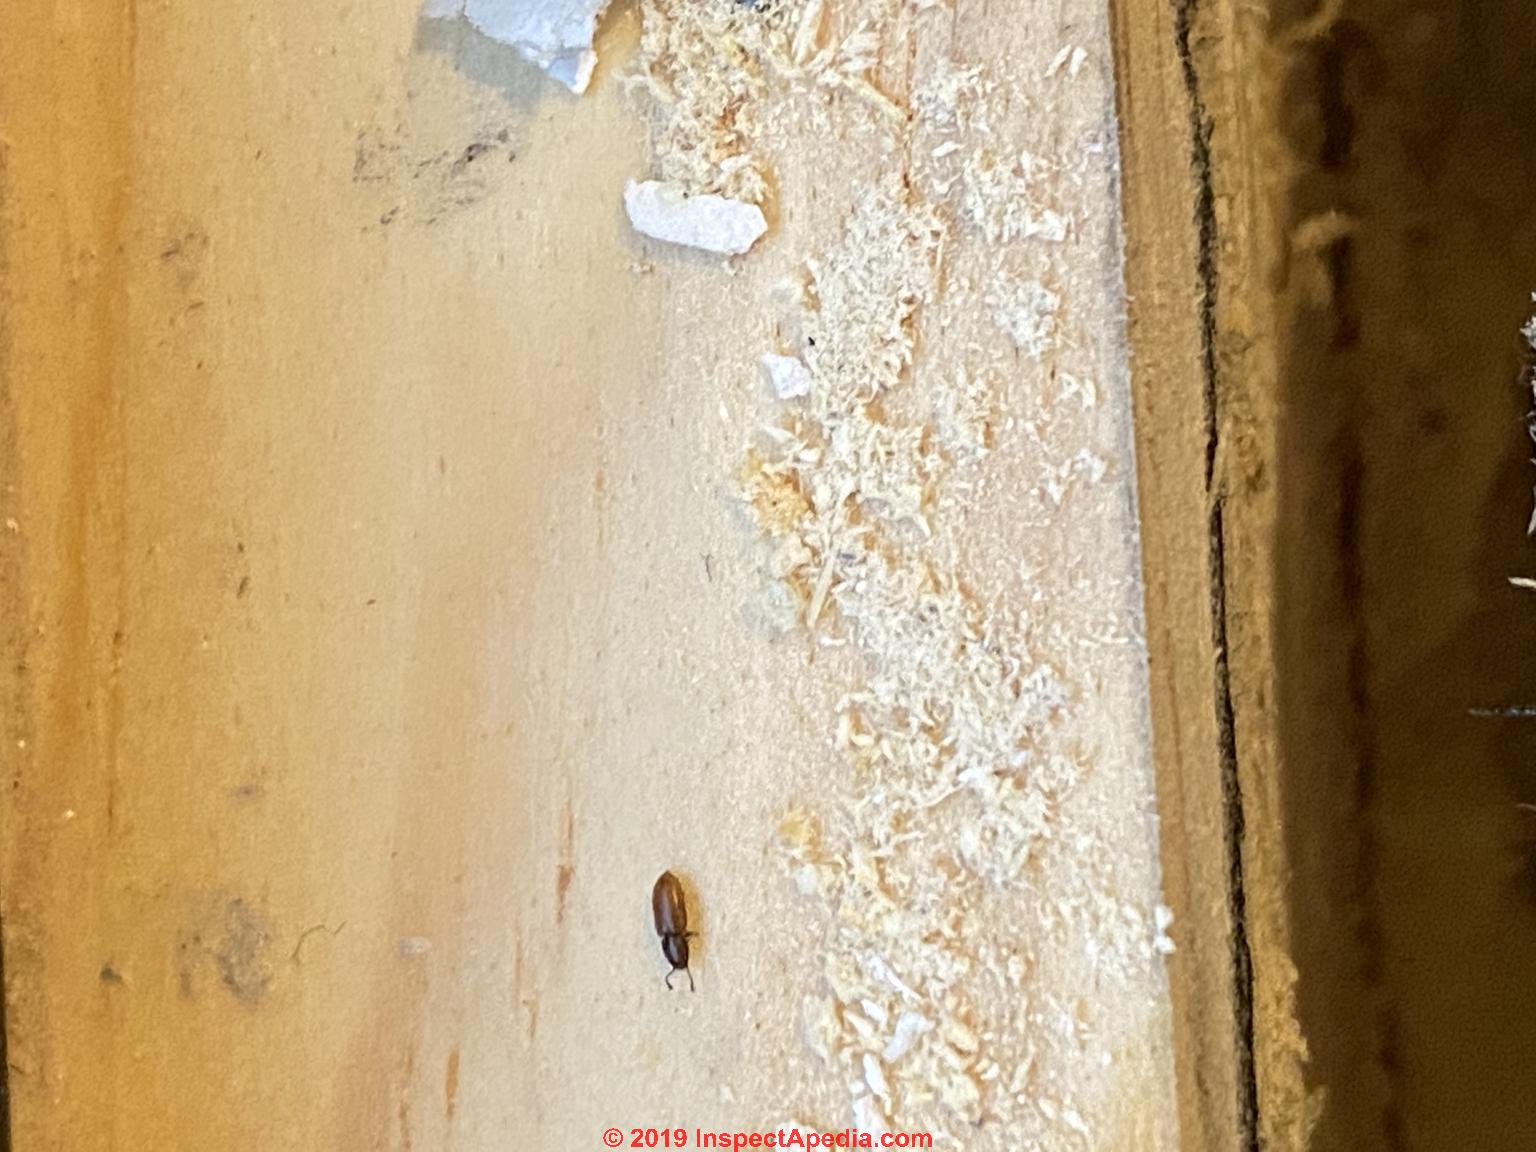 should i buy a house with powder post beetles